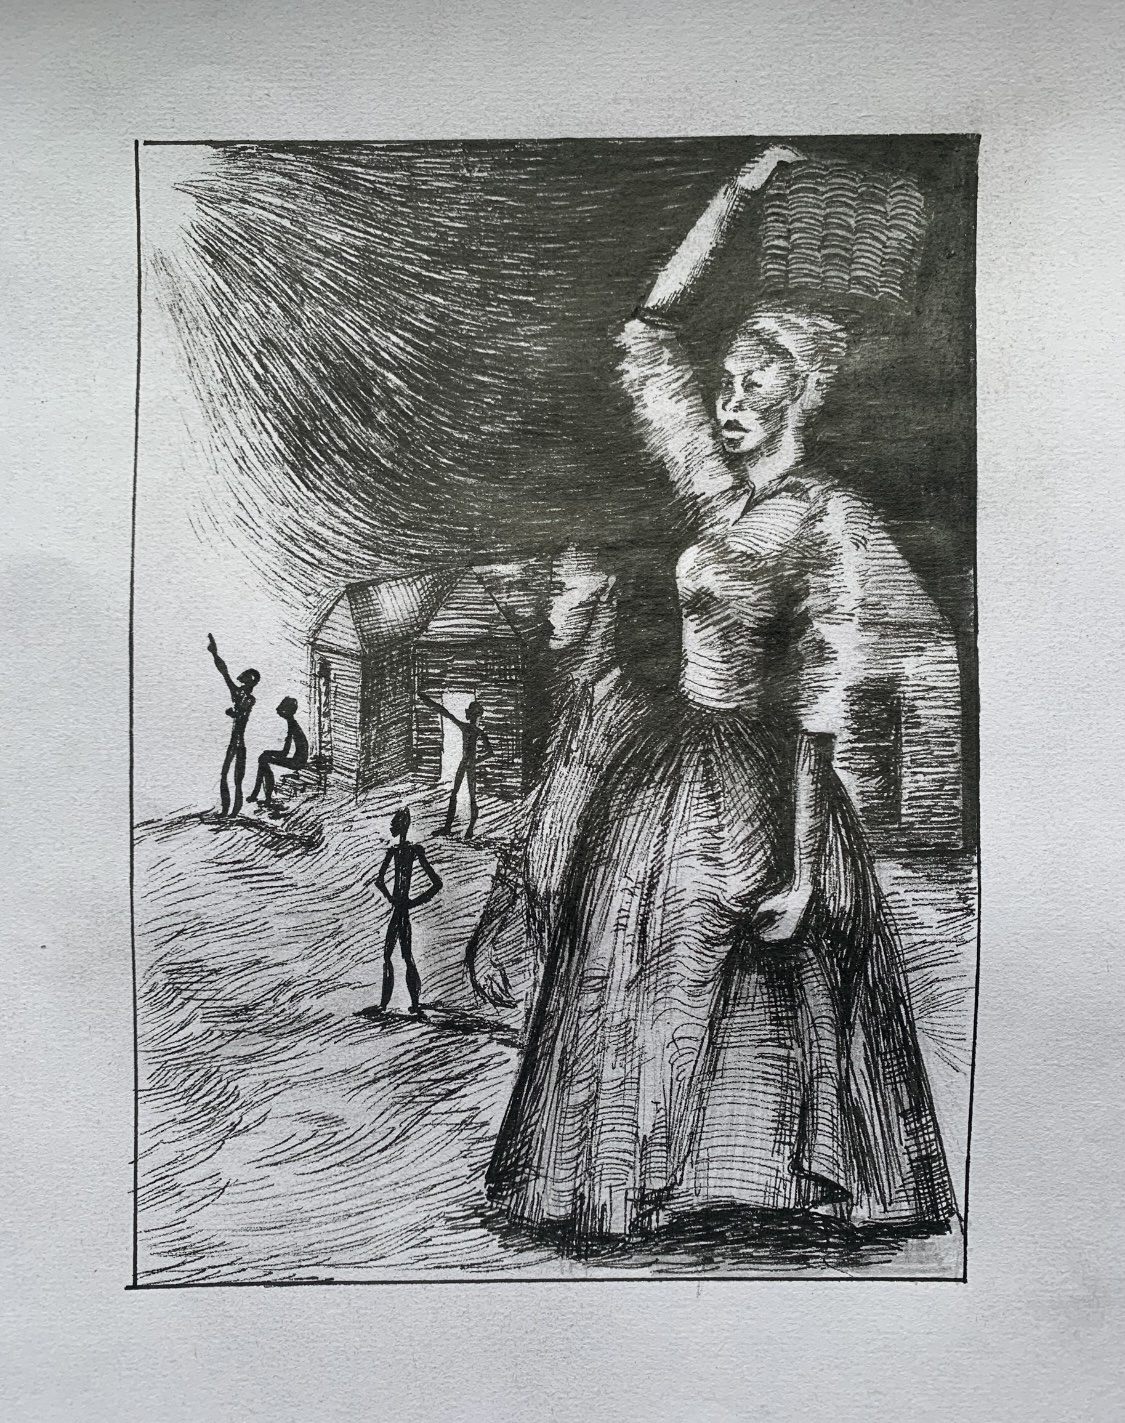 An etching of a woman in a long dress